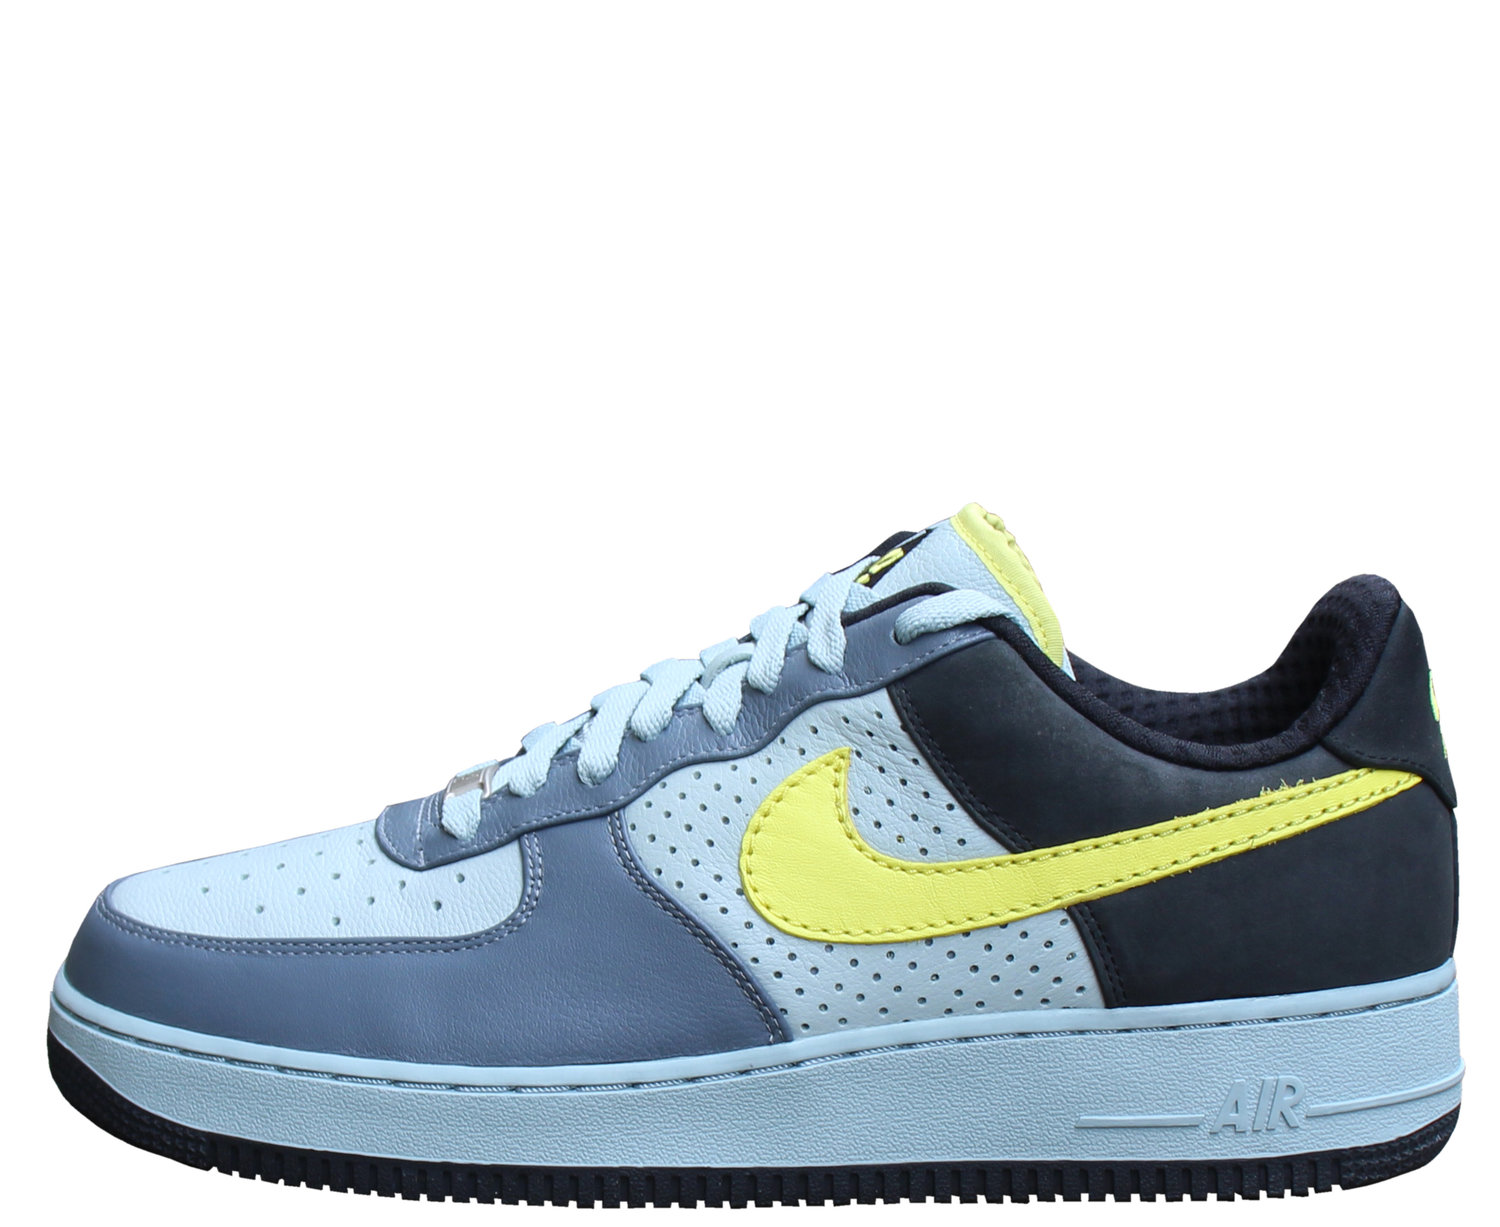 Nike Air Force 1 Low Premium "ACG Wildwood" Light Pumice/Sonic Yellow/Flint  Grey/Black (Size 9) DS — Roots